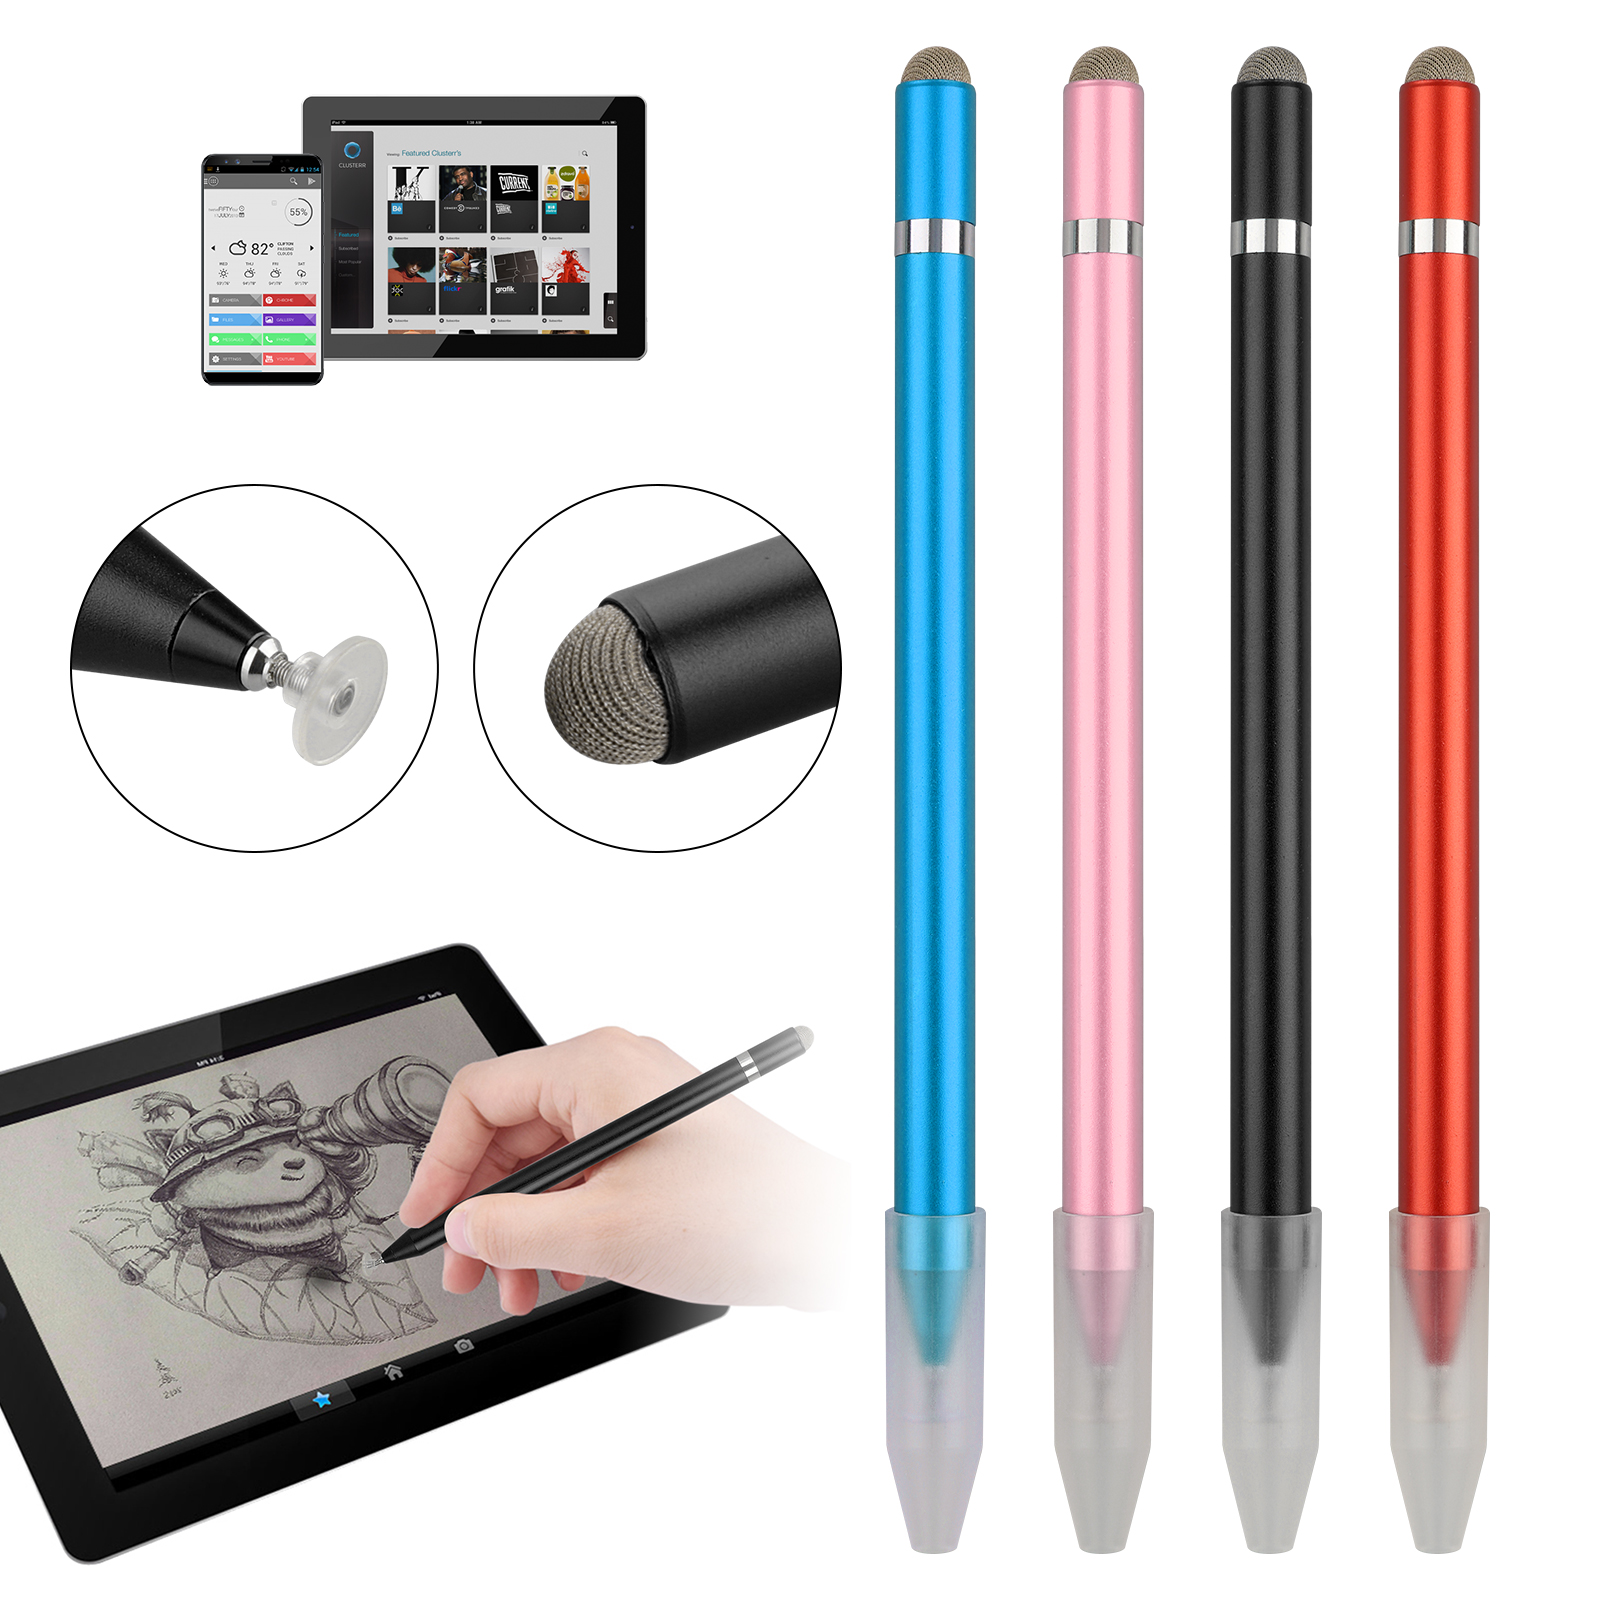 Precision Capacitive Stylus Touch Screen Drawing Pen for iPhone Samsung iPad